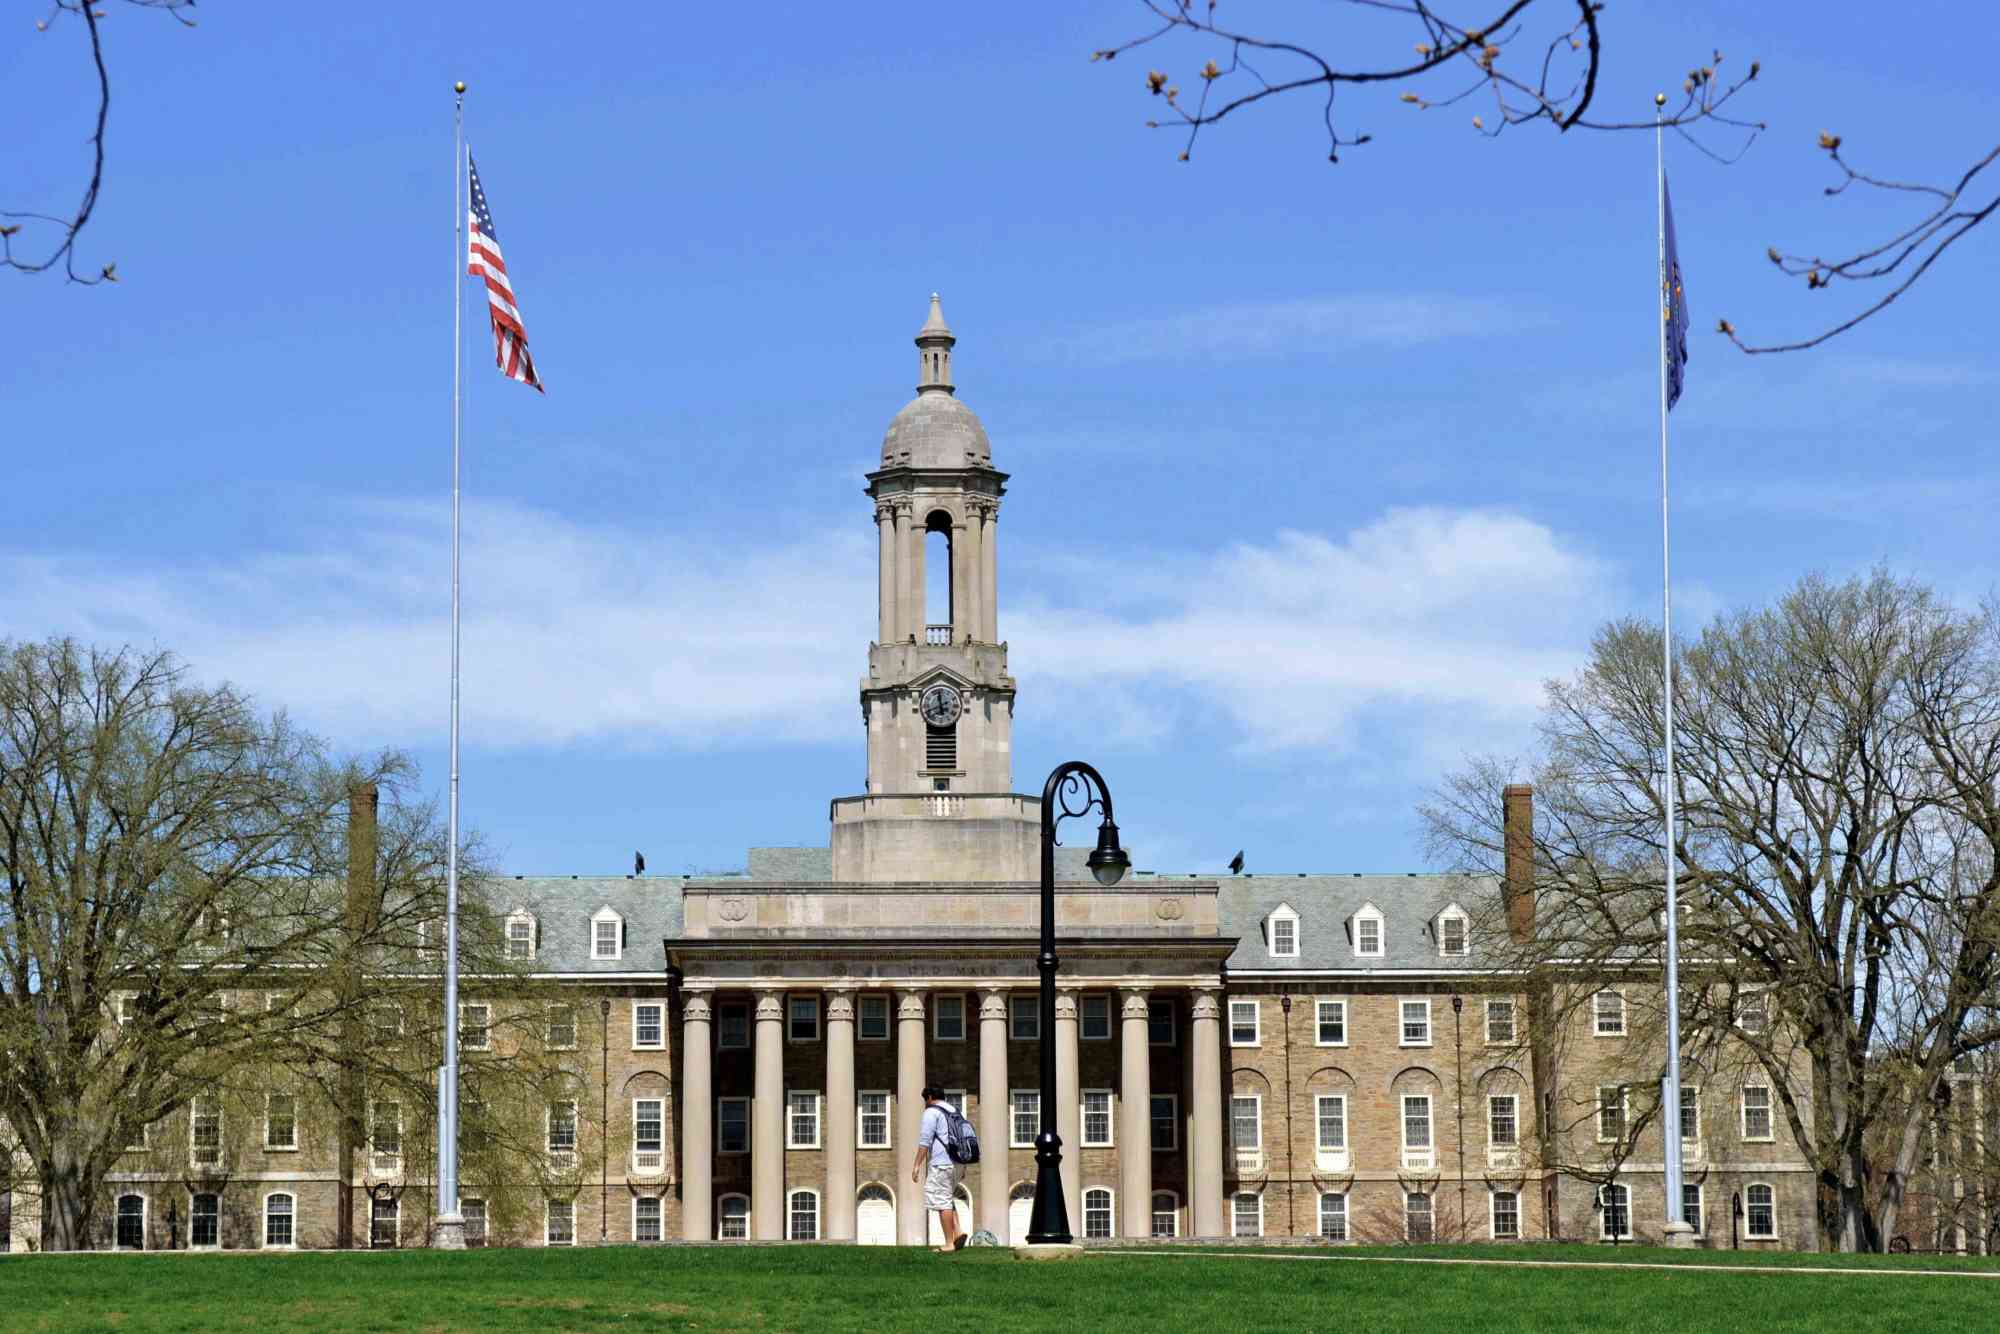 Penn State Old Main Building in State College